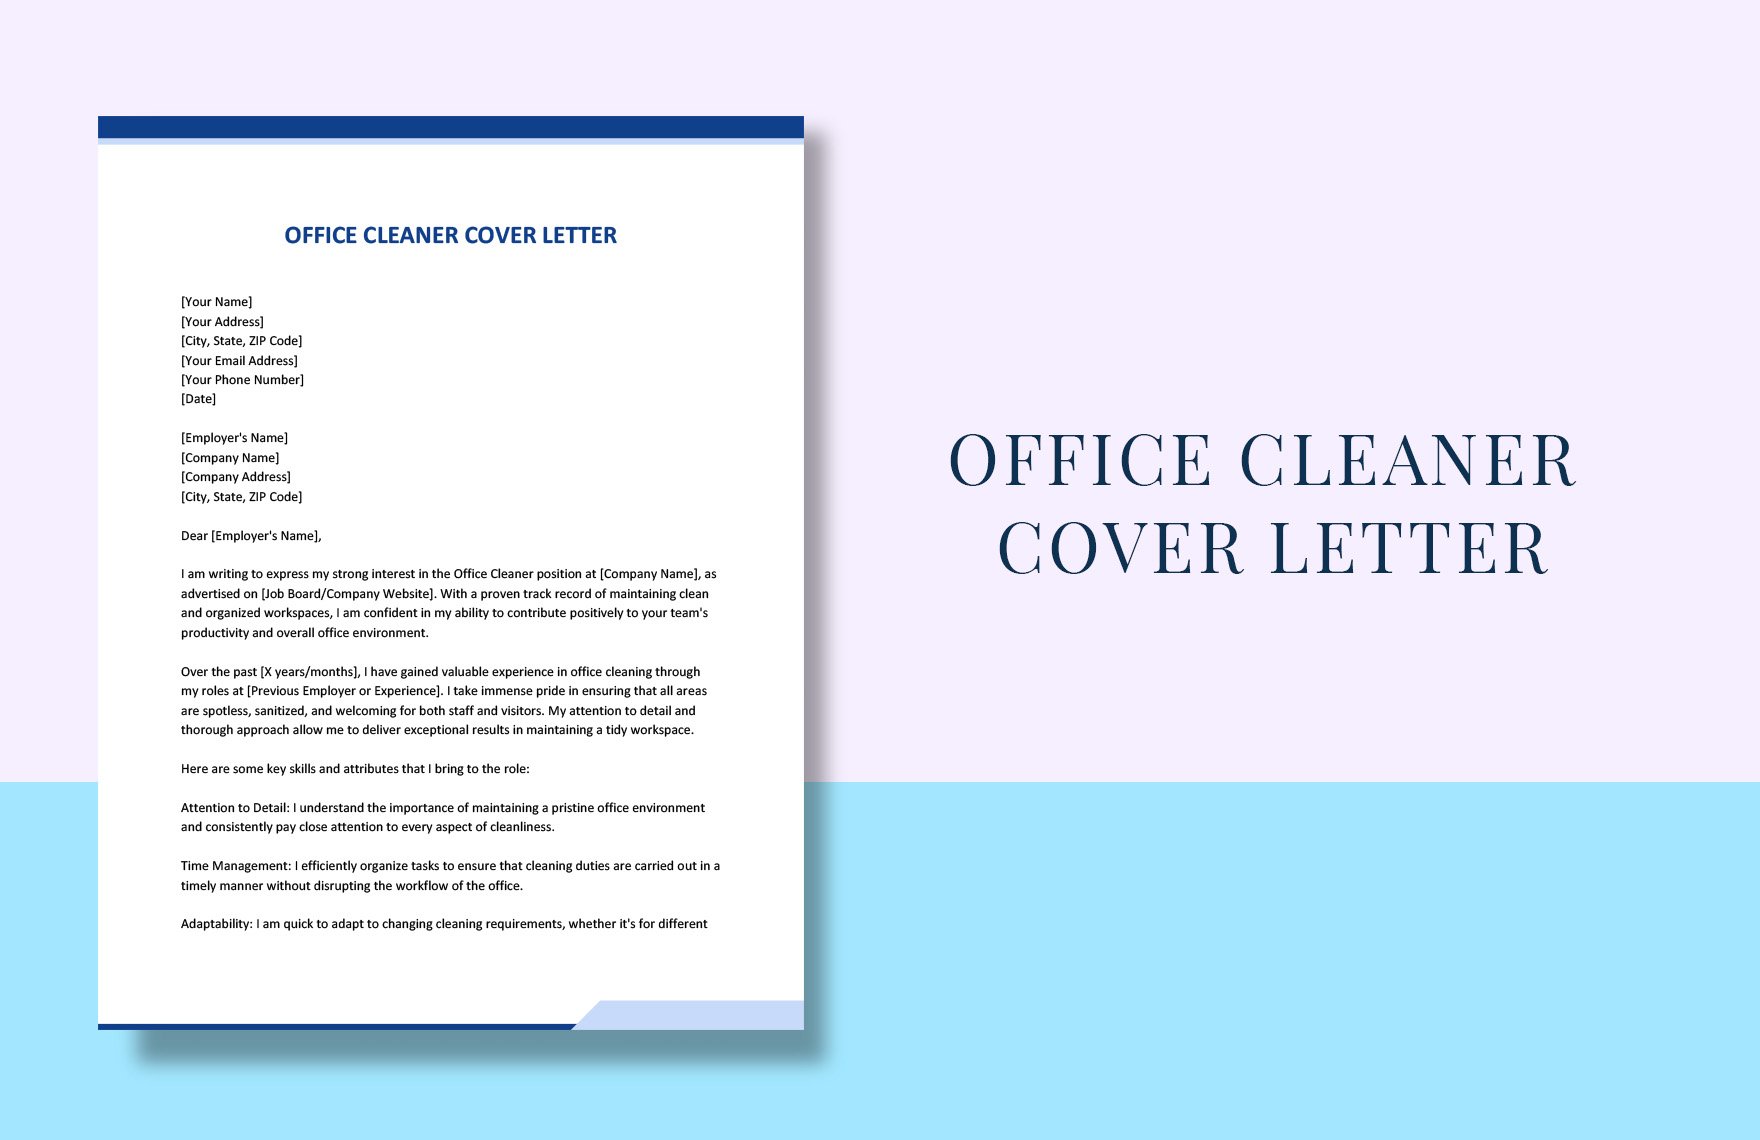 Office Cleaner Cover Letter